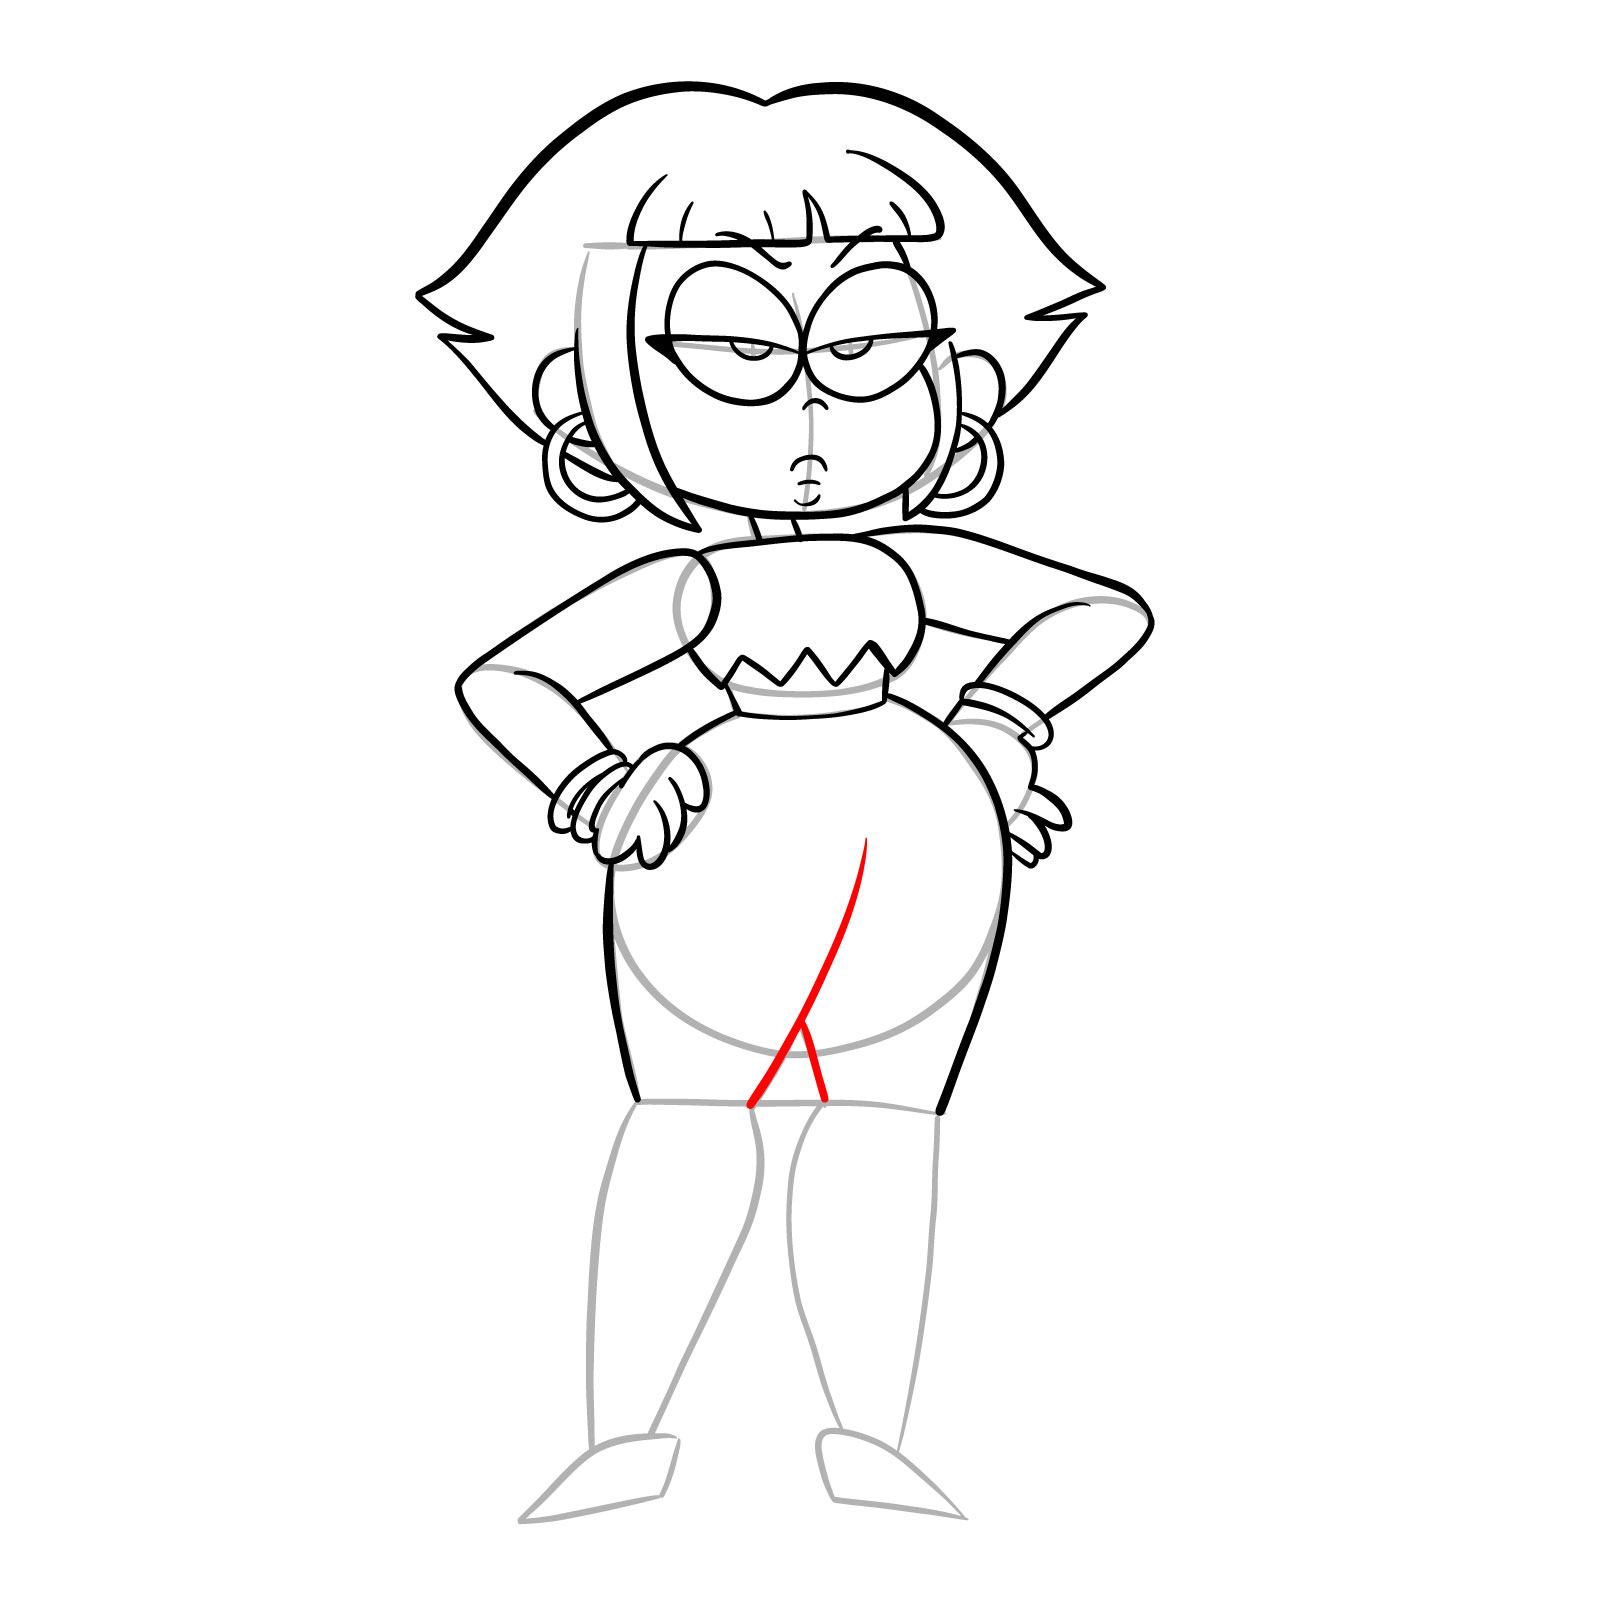 How to draw Human Shannon from OK K.O.! - step 25